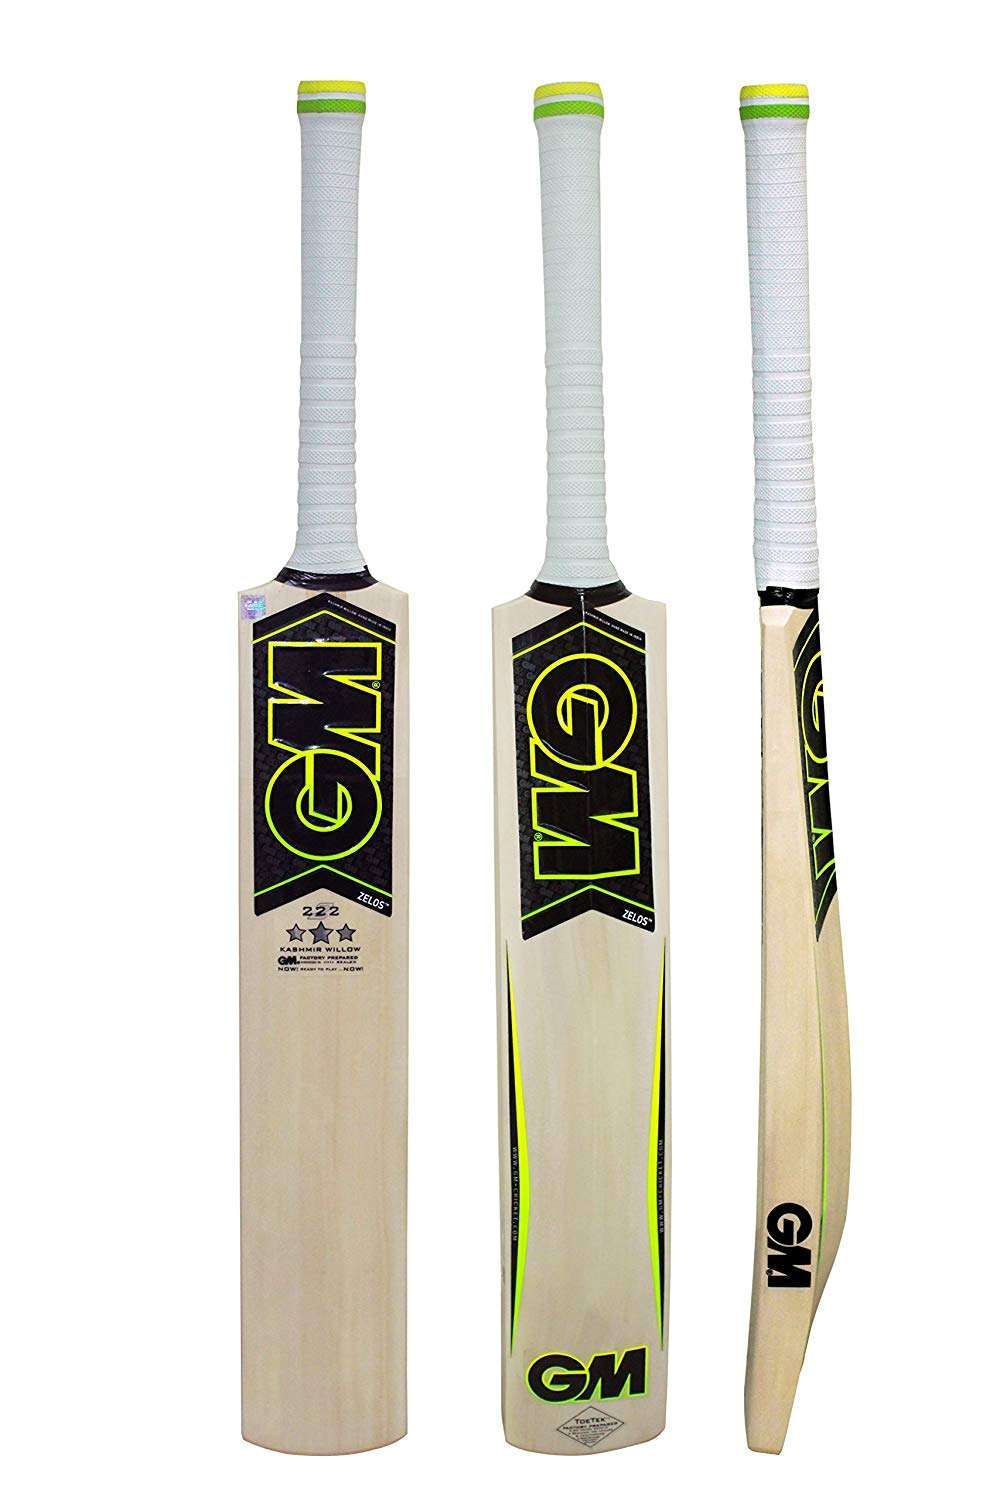 13 Best cricket bats available in India (2020 Edition)